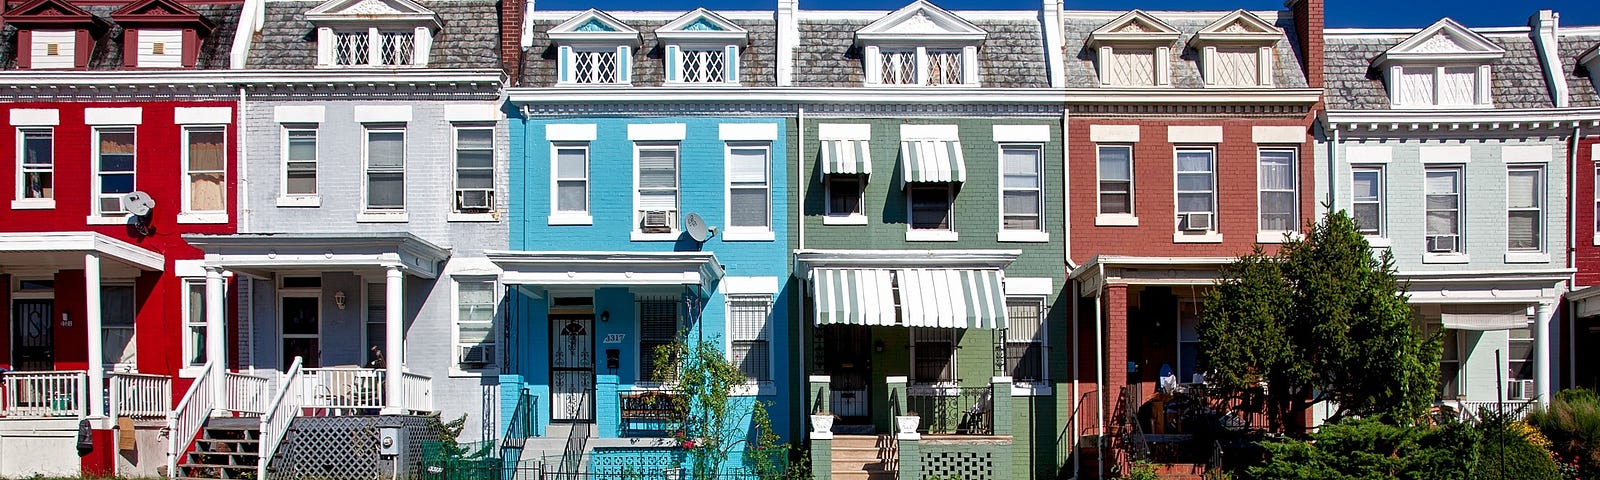 Red, silver, blue, and green row houses in an American city